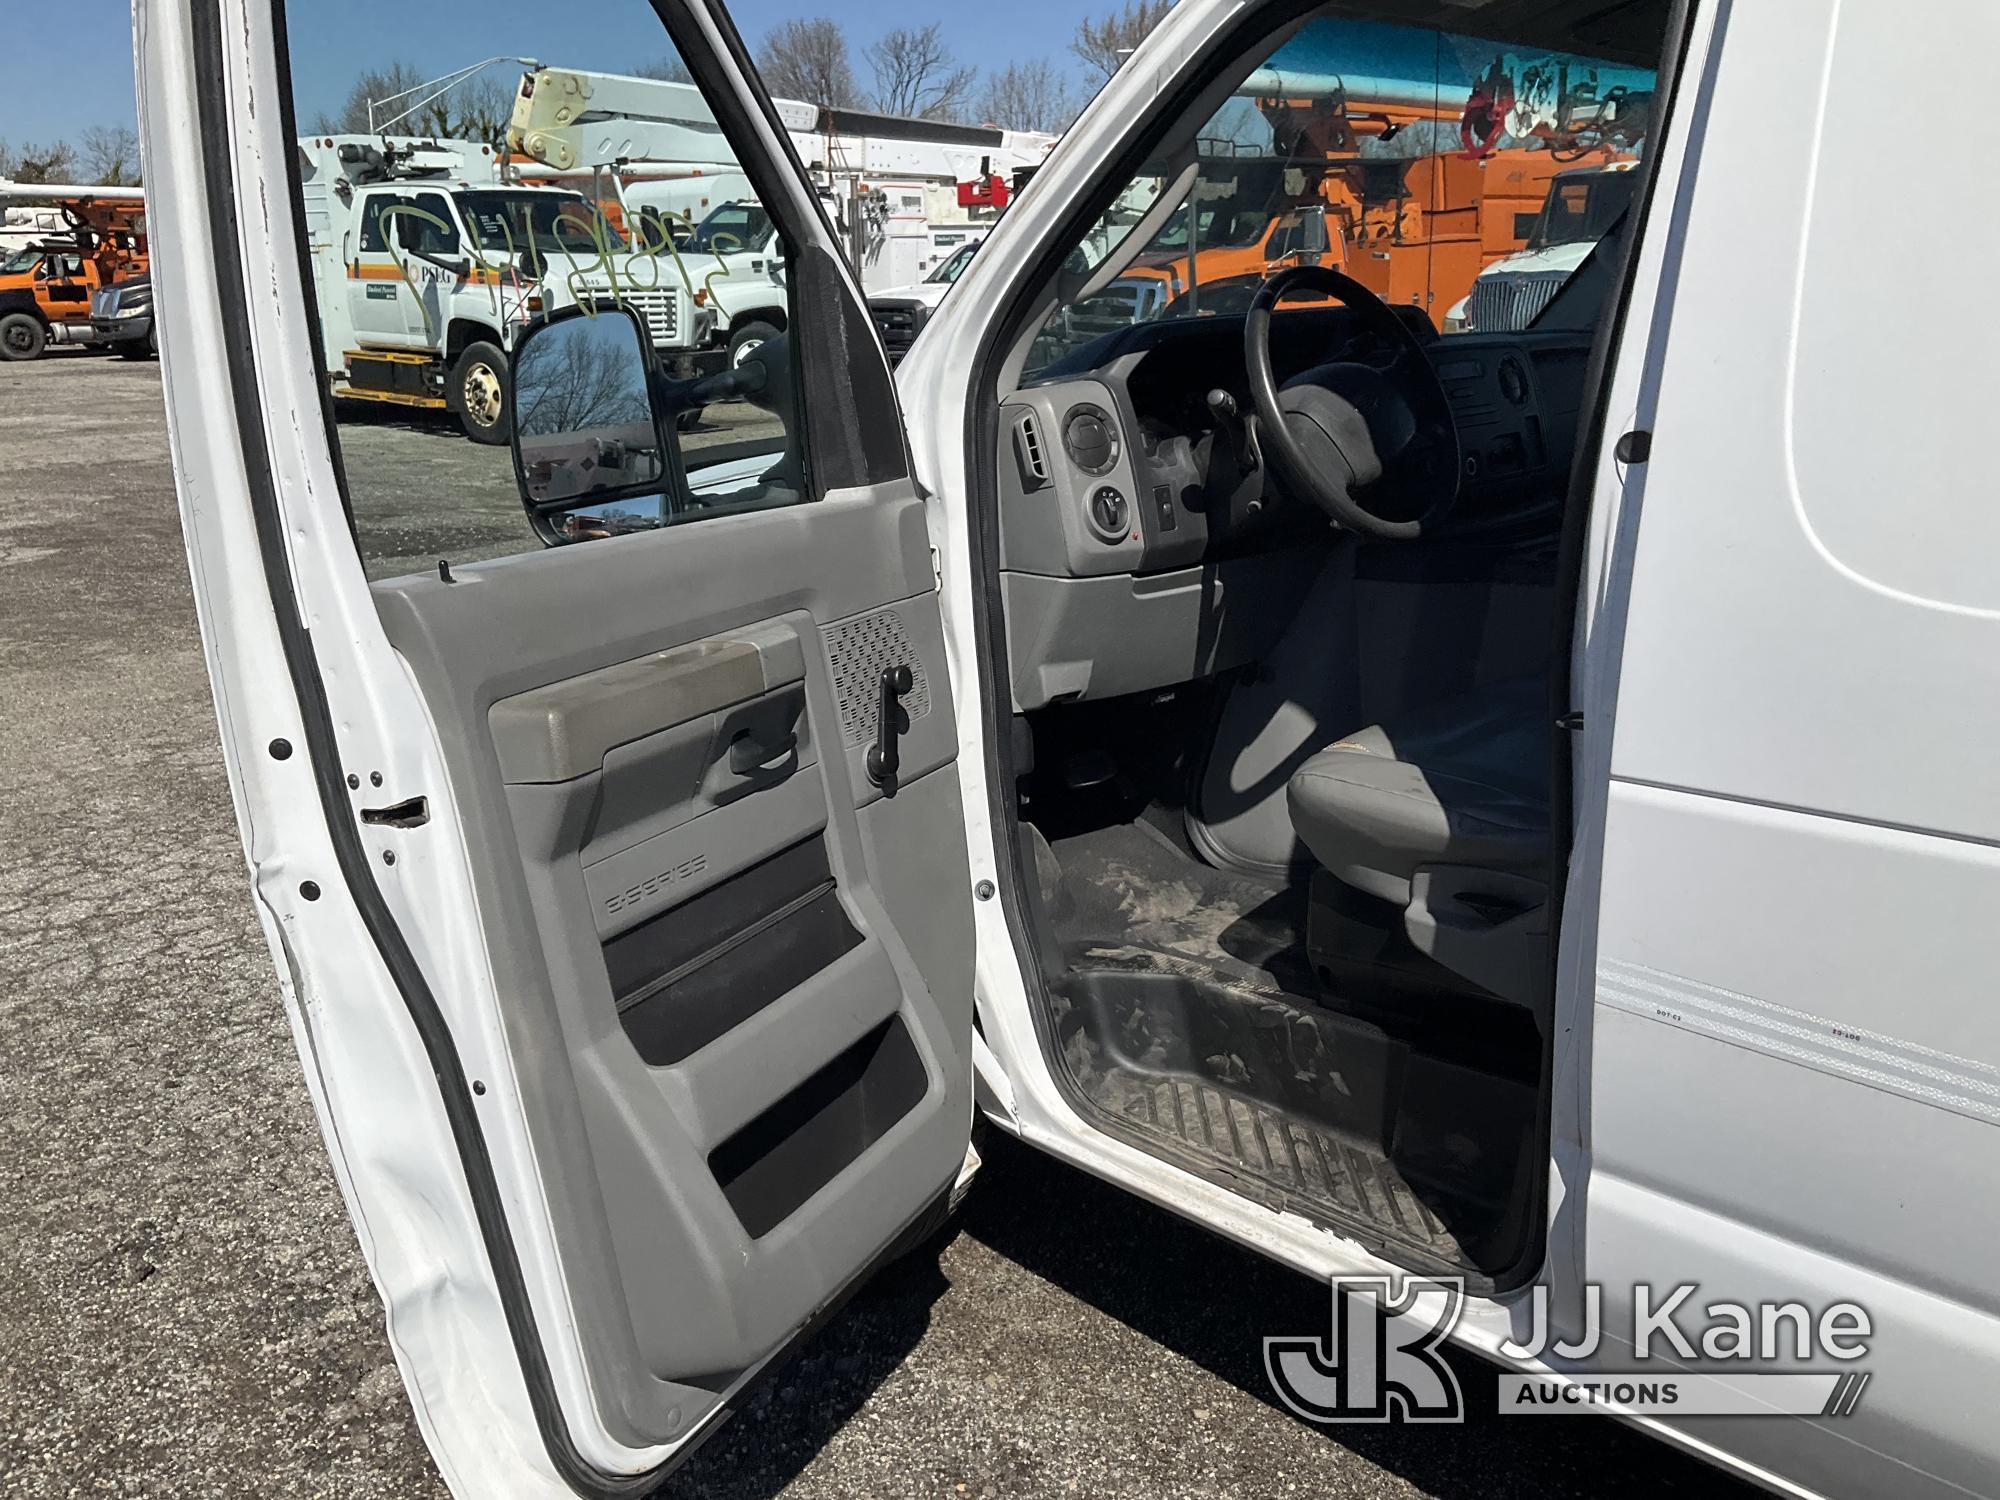 (Plymouth Meeting, PA) ETI ETT29-SNV, Telescopic Non-Insulated Bucket Van mounted on 2010 Ford E350